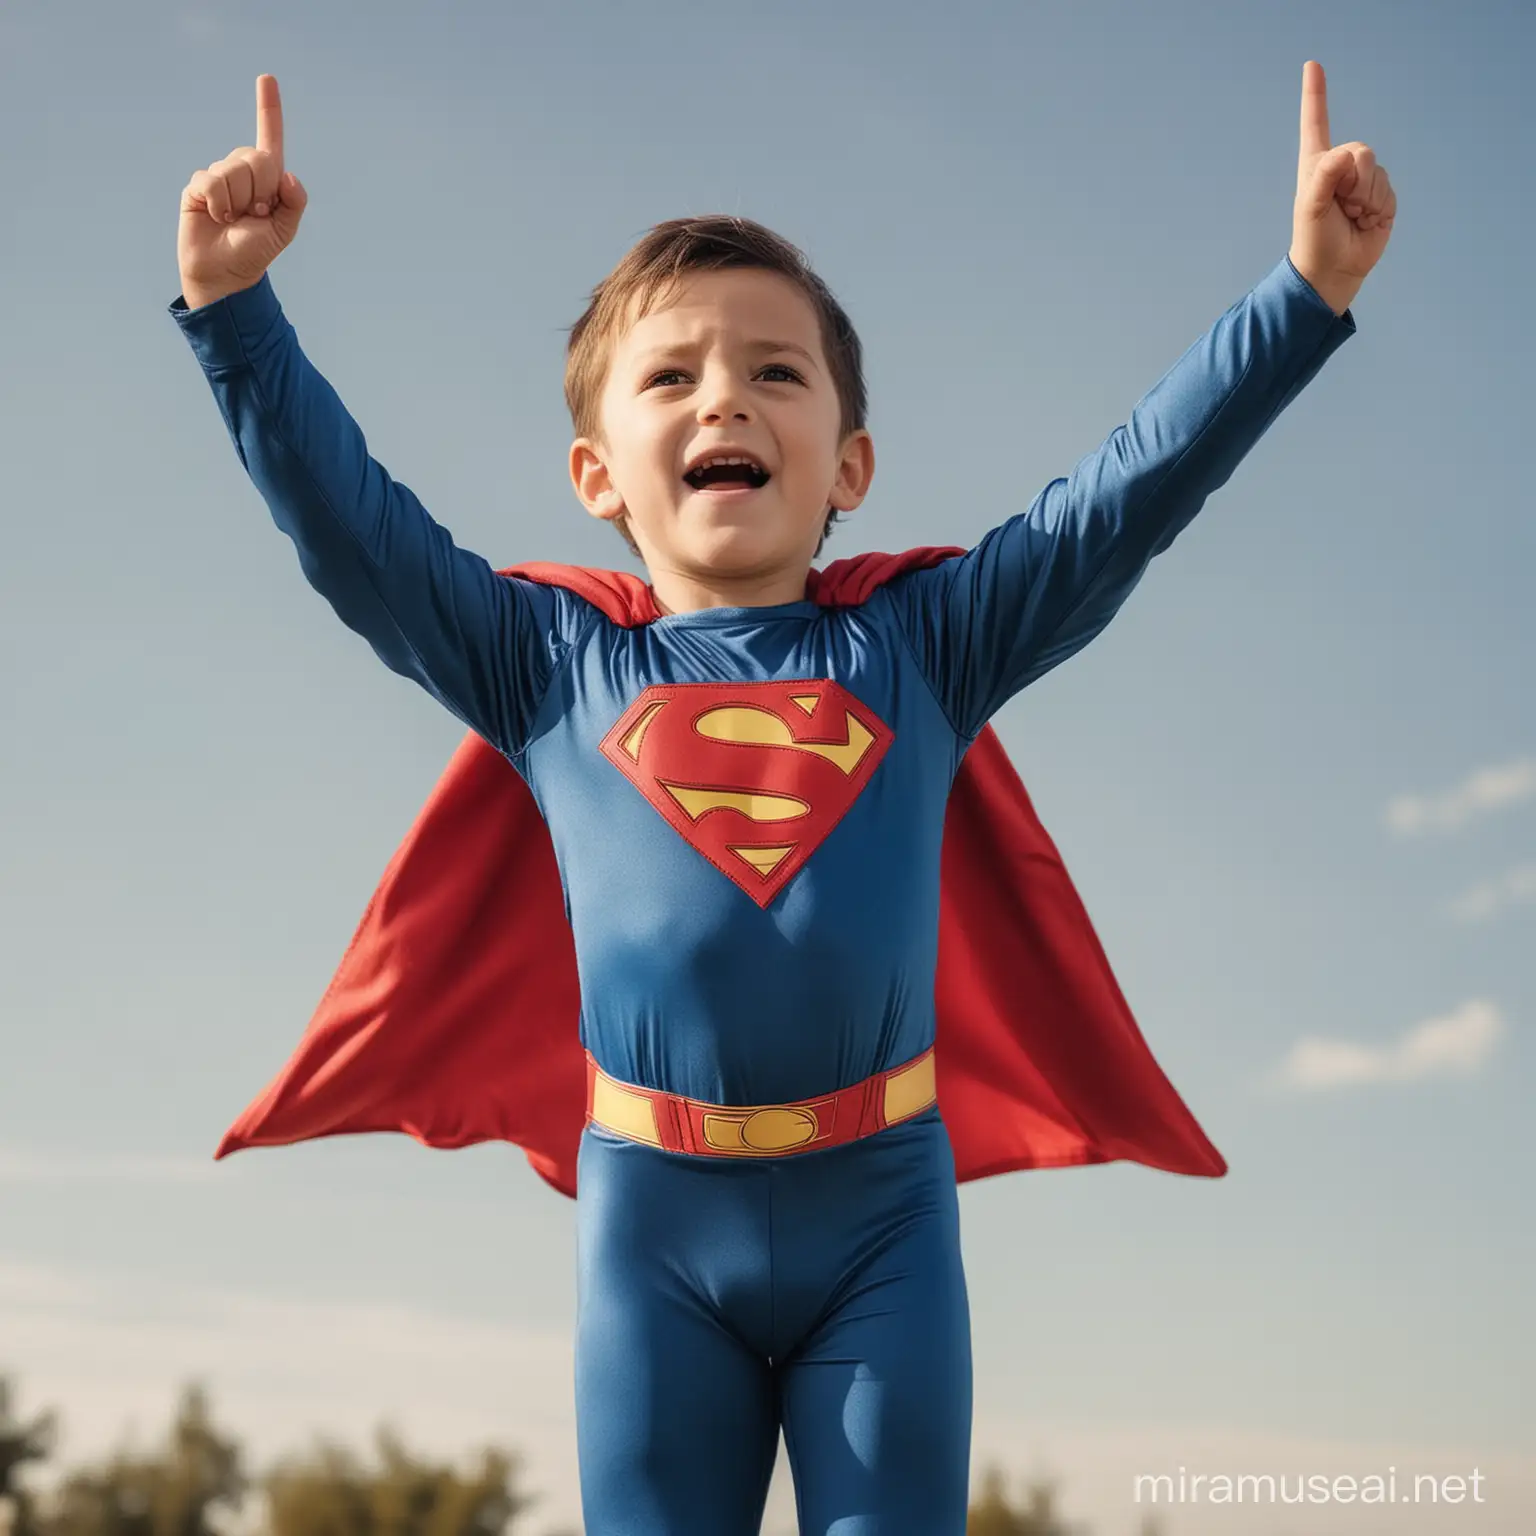 Superman ADHD Child Soaring High with Raised Hand